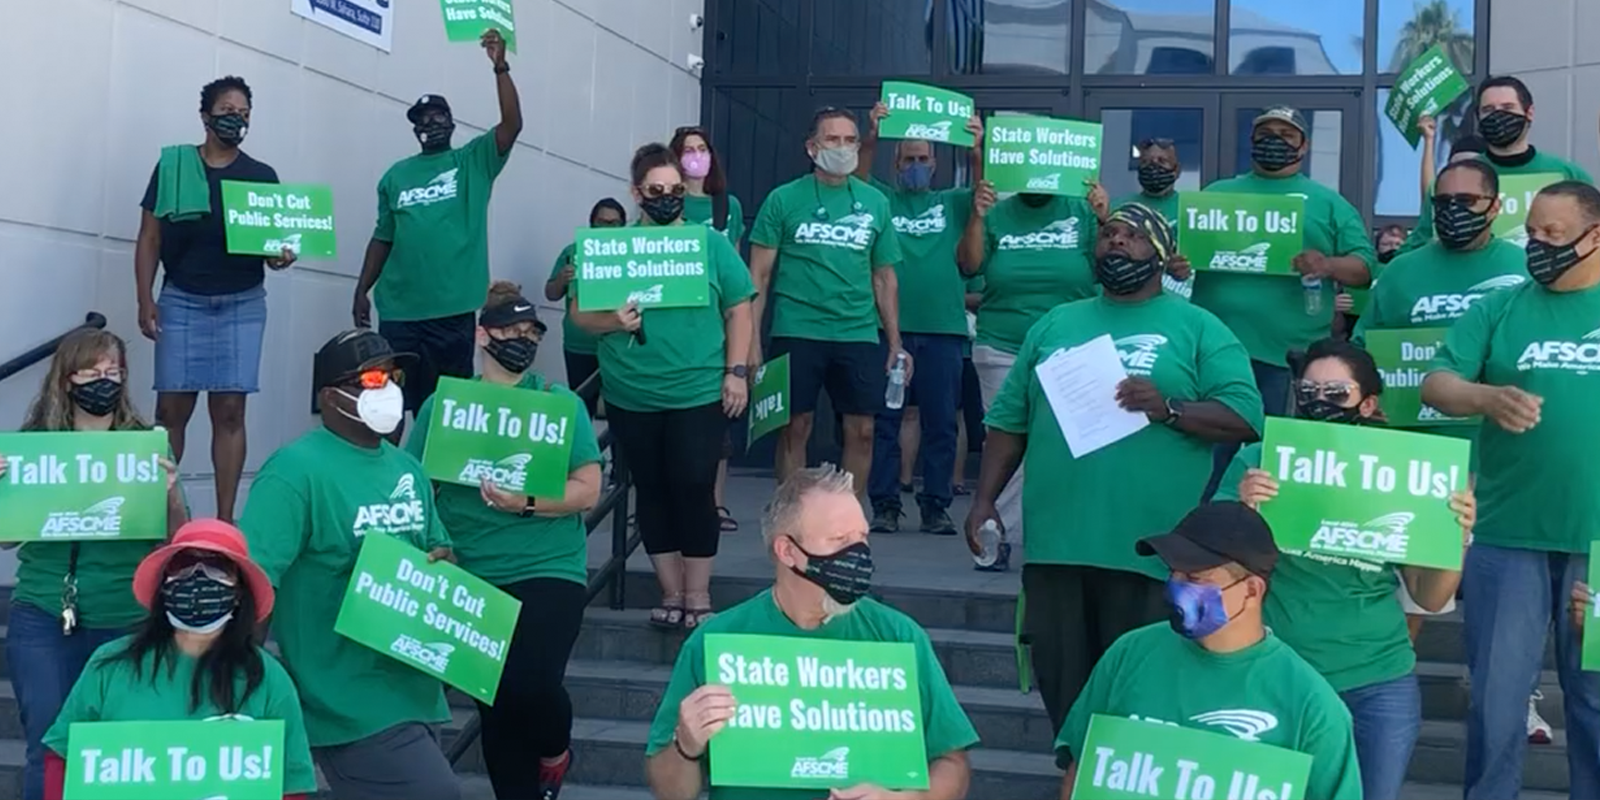 Nevada state workers to get furlough pay following months of AFSCME member advocacy